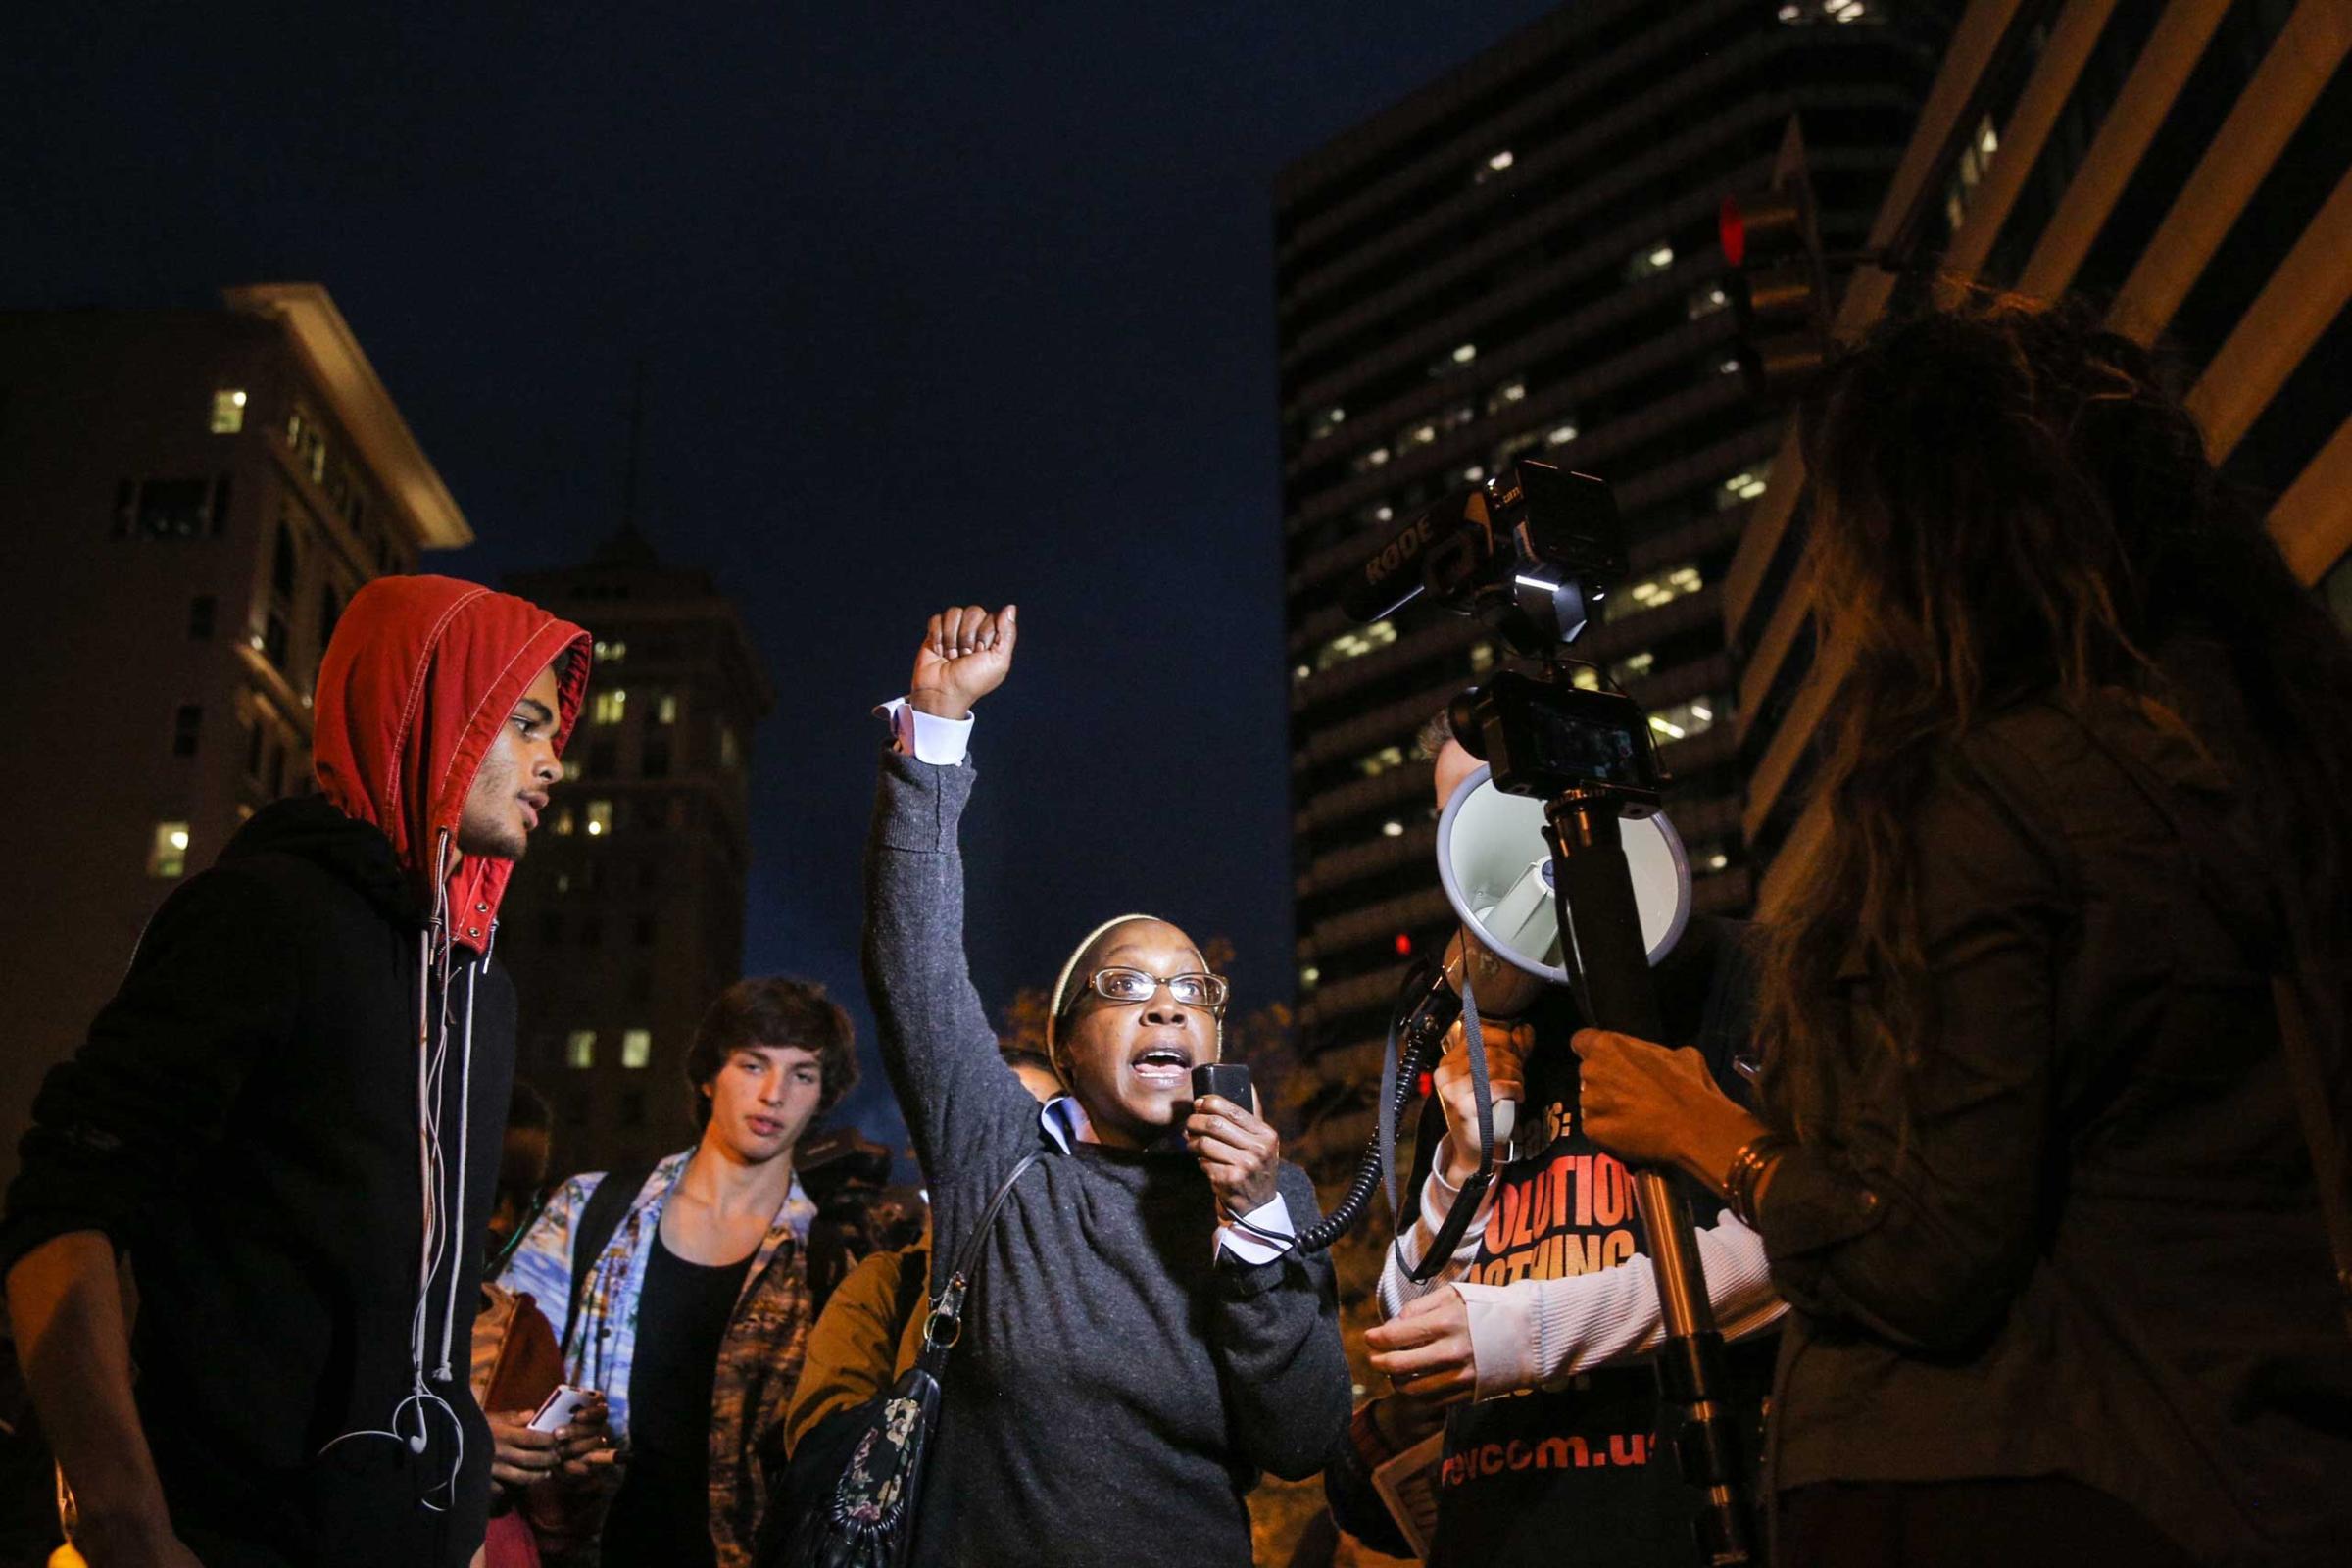 Protests Erupt Across Country After Grand Jury Does Not Indict NYPD Officer Over Chokehold Death